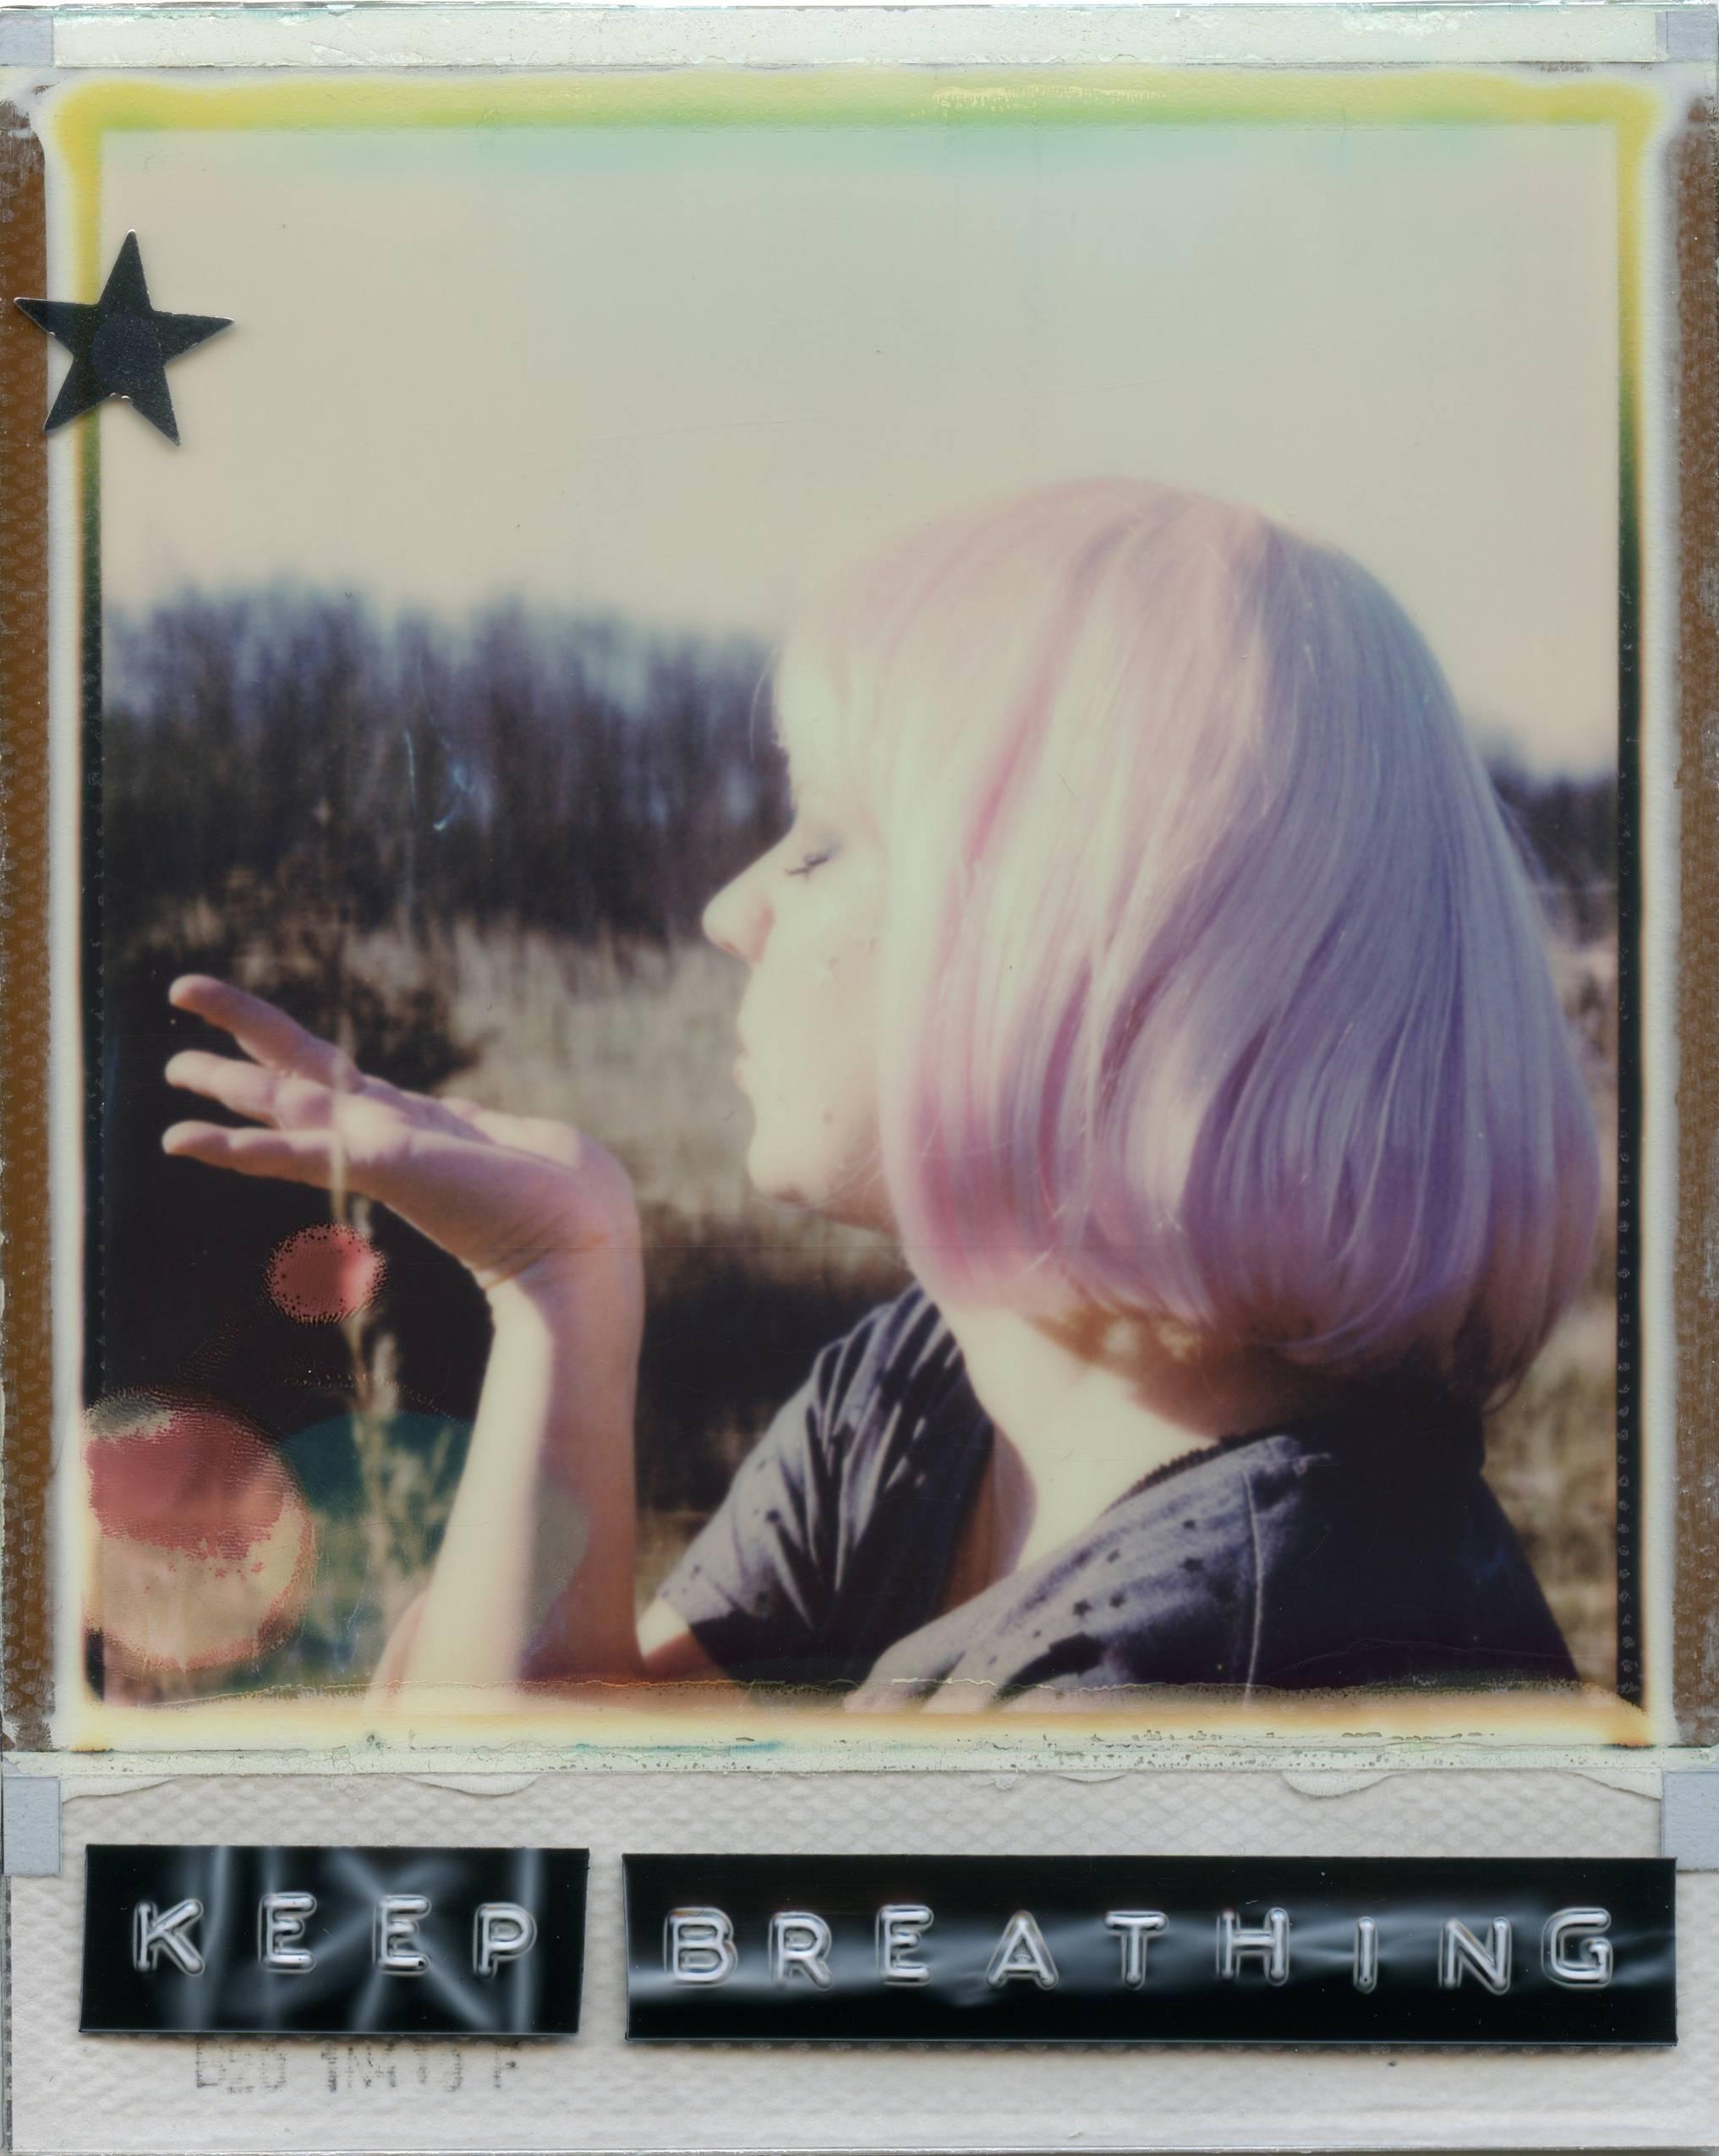 The Trick Is To Keep Breathing - based on 2 Polaroids - Photograph by Julia Beyer